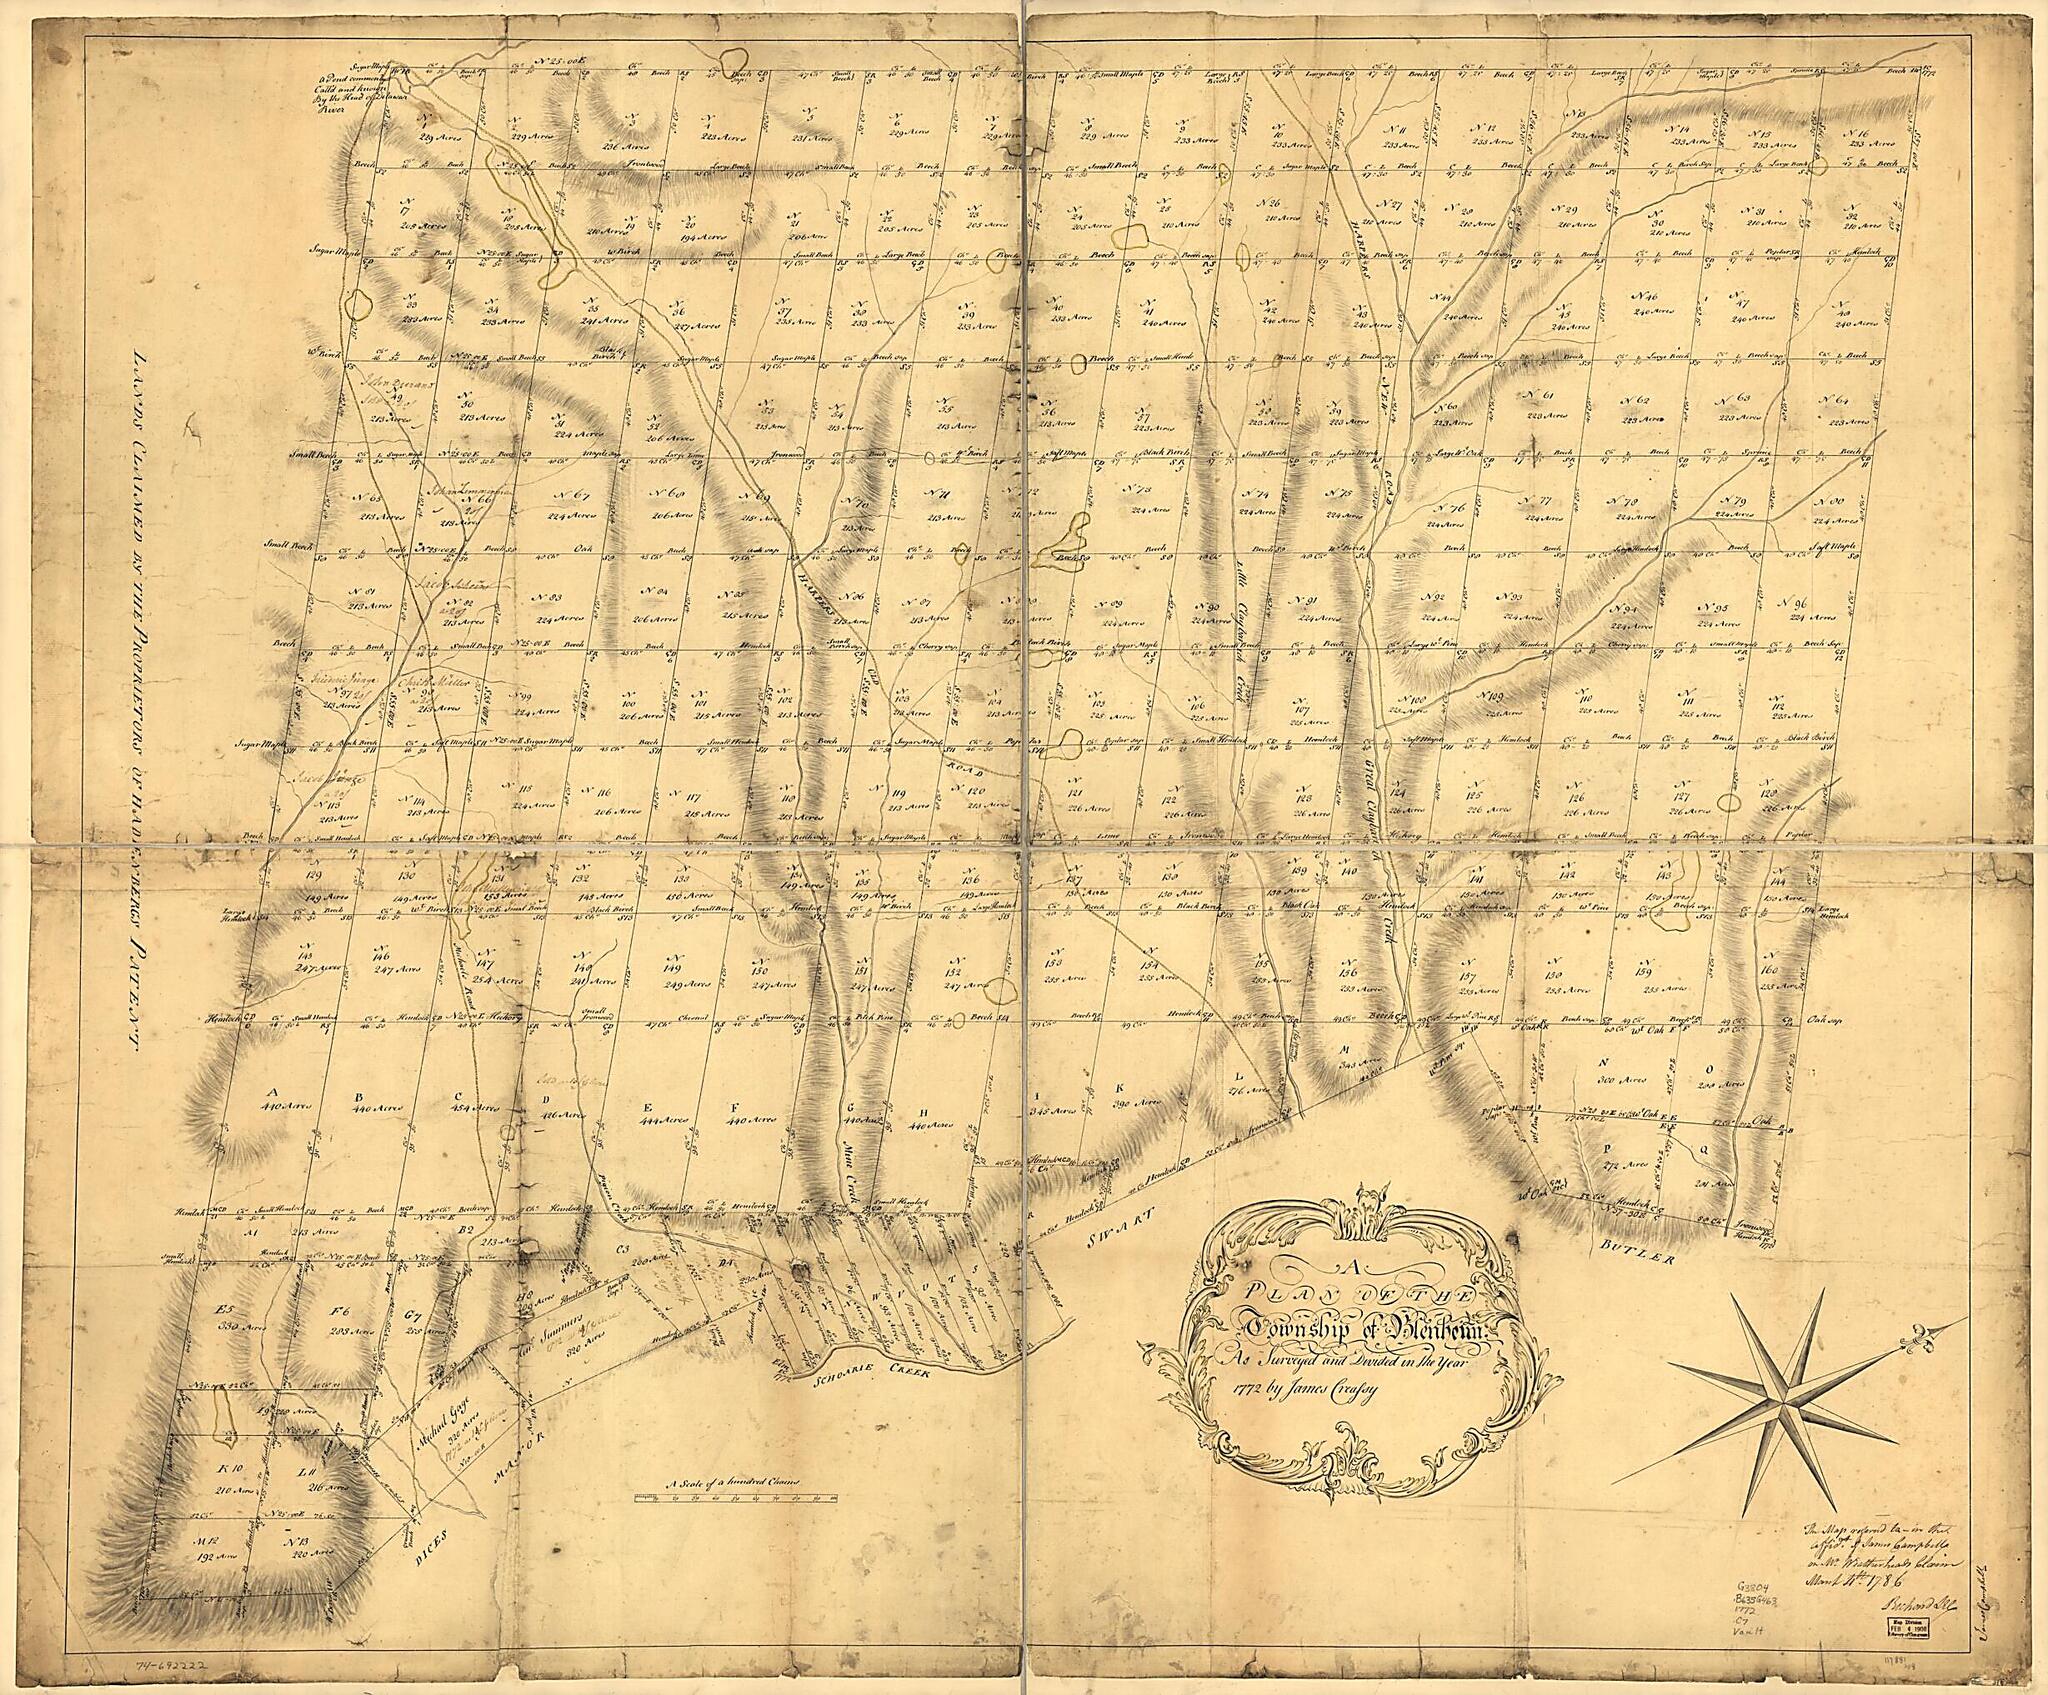 This old map of A Plan of the Township of Blenheim, As Surveyed and Divided In the Year from 1772 was created by James Creassy in 1772